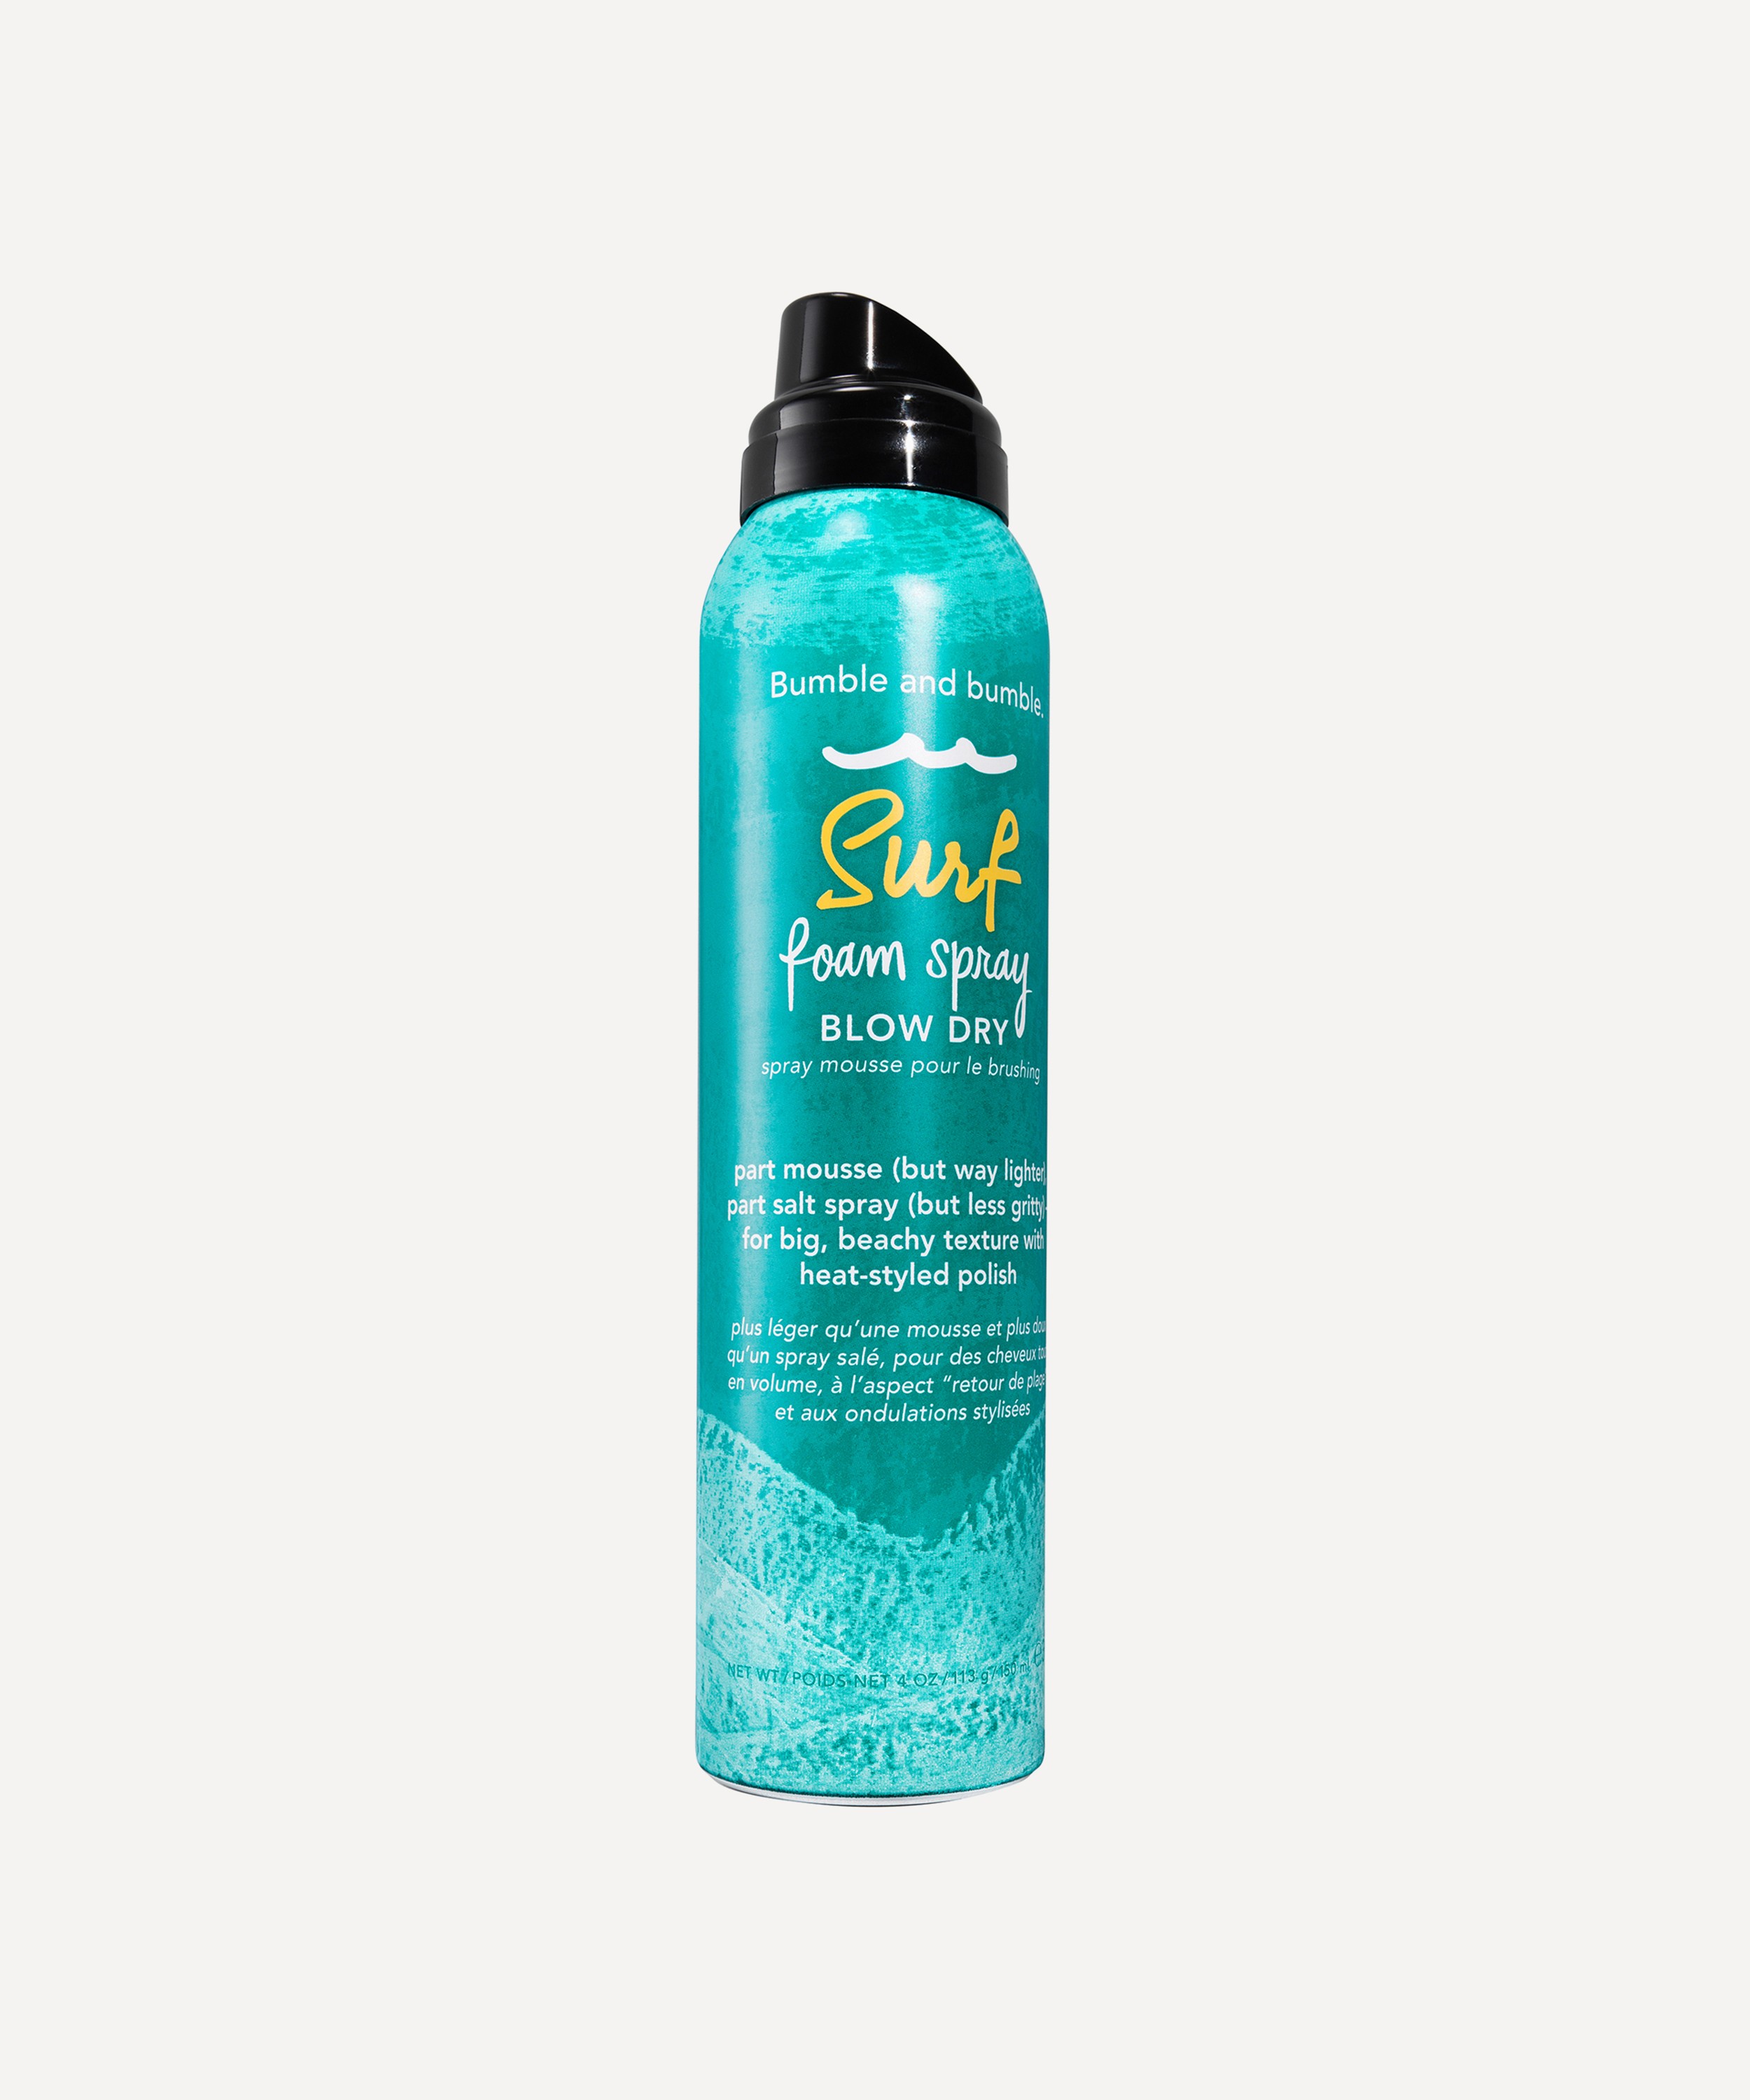 Bumble and Bumble - Surf Blow Dry Foam